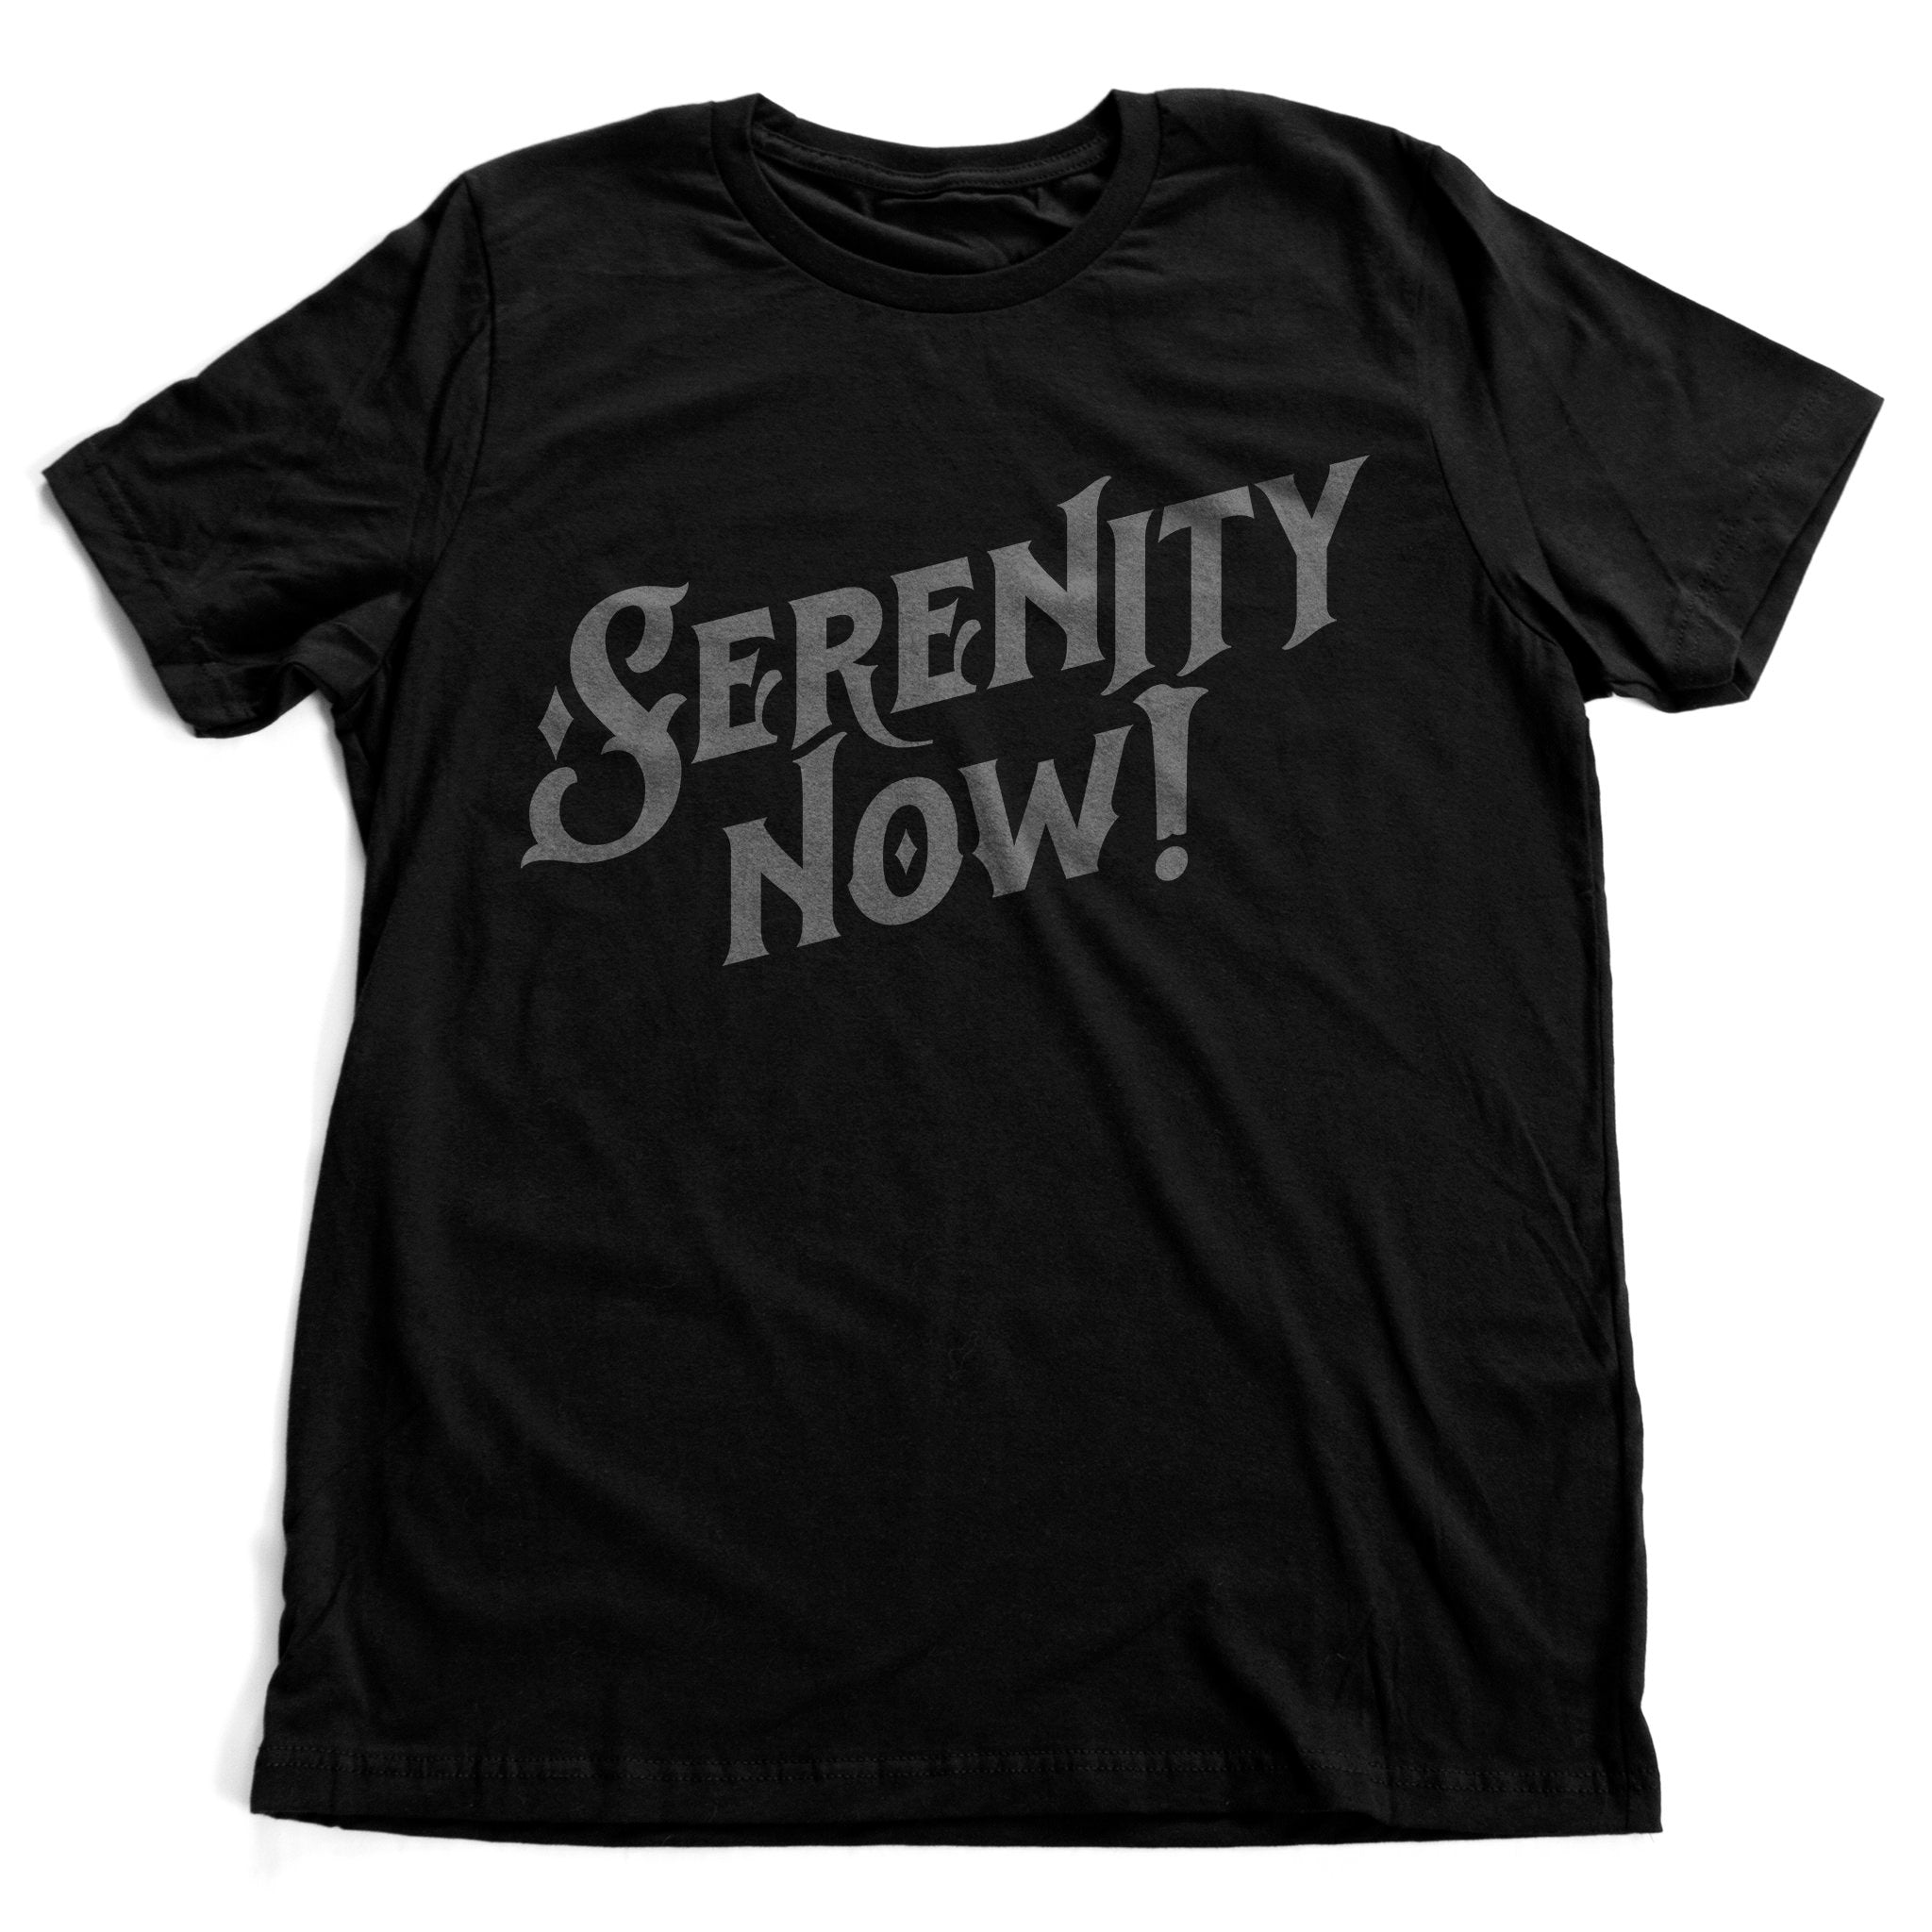 SERENITY NOW! — funny Seinfeld / Frank Costanza meme reference — tv parody unisex T-Shirt